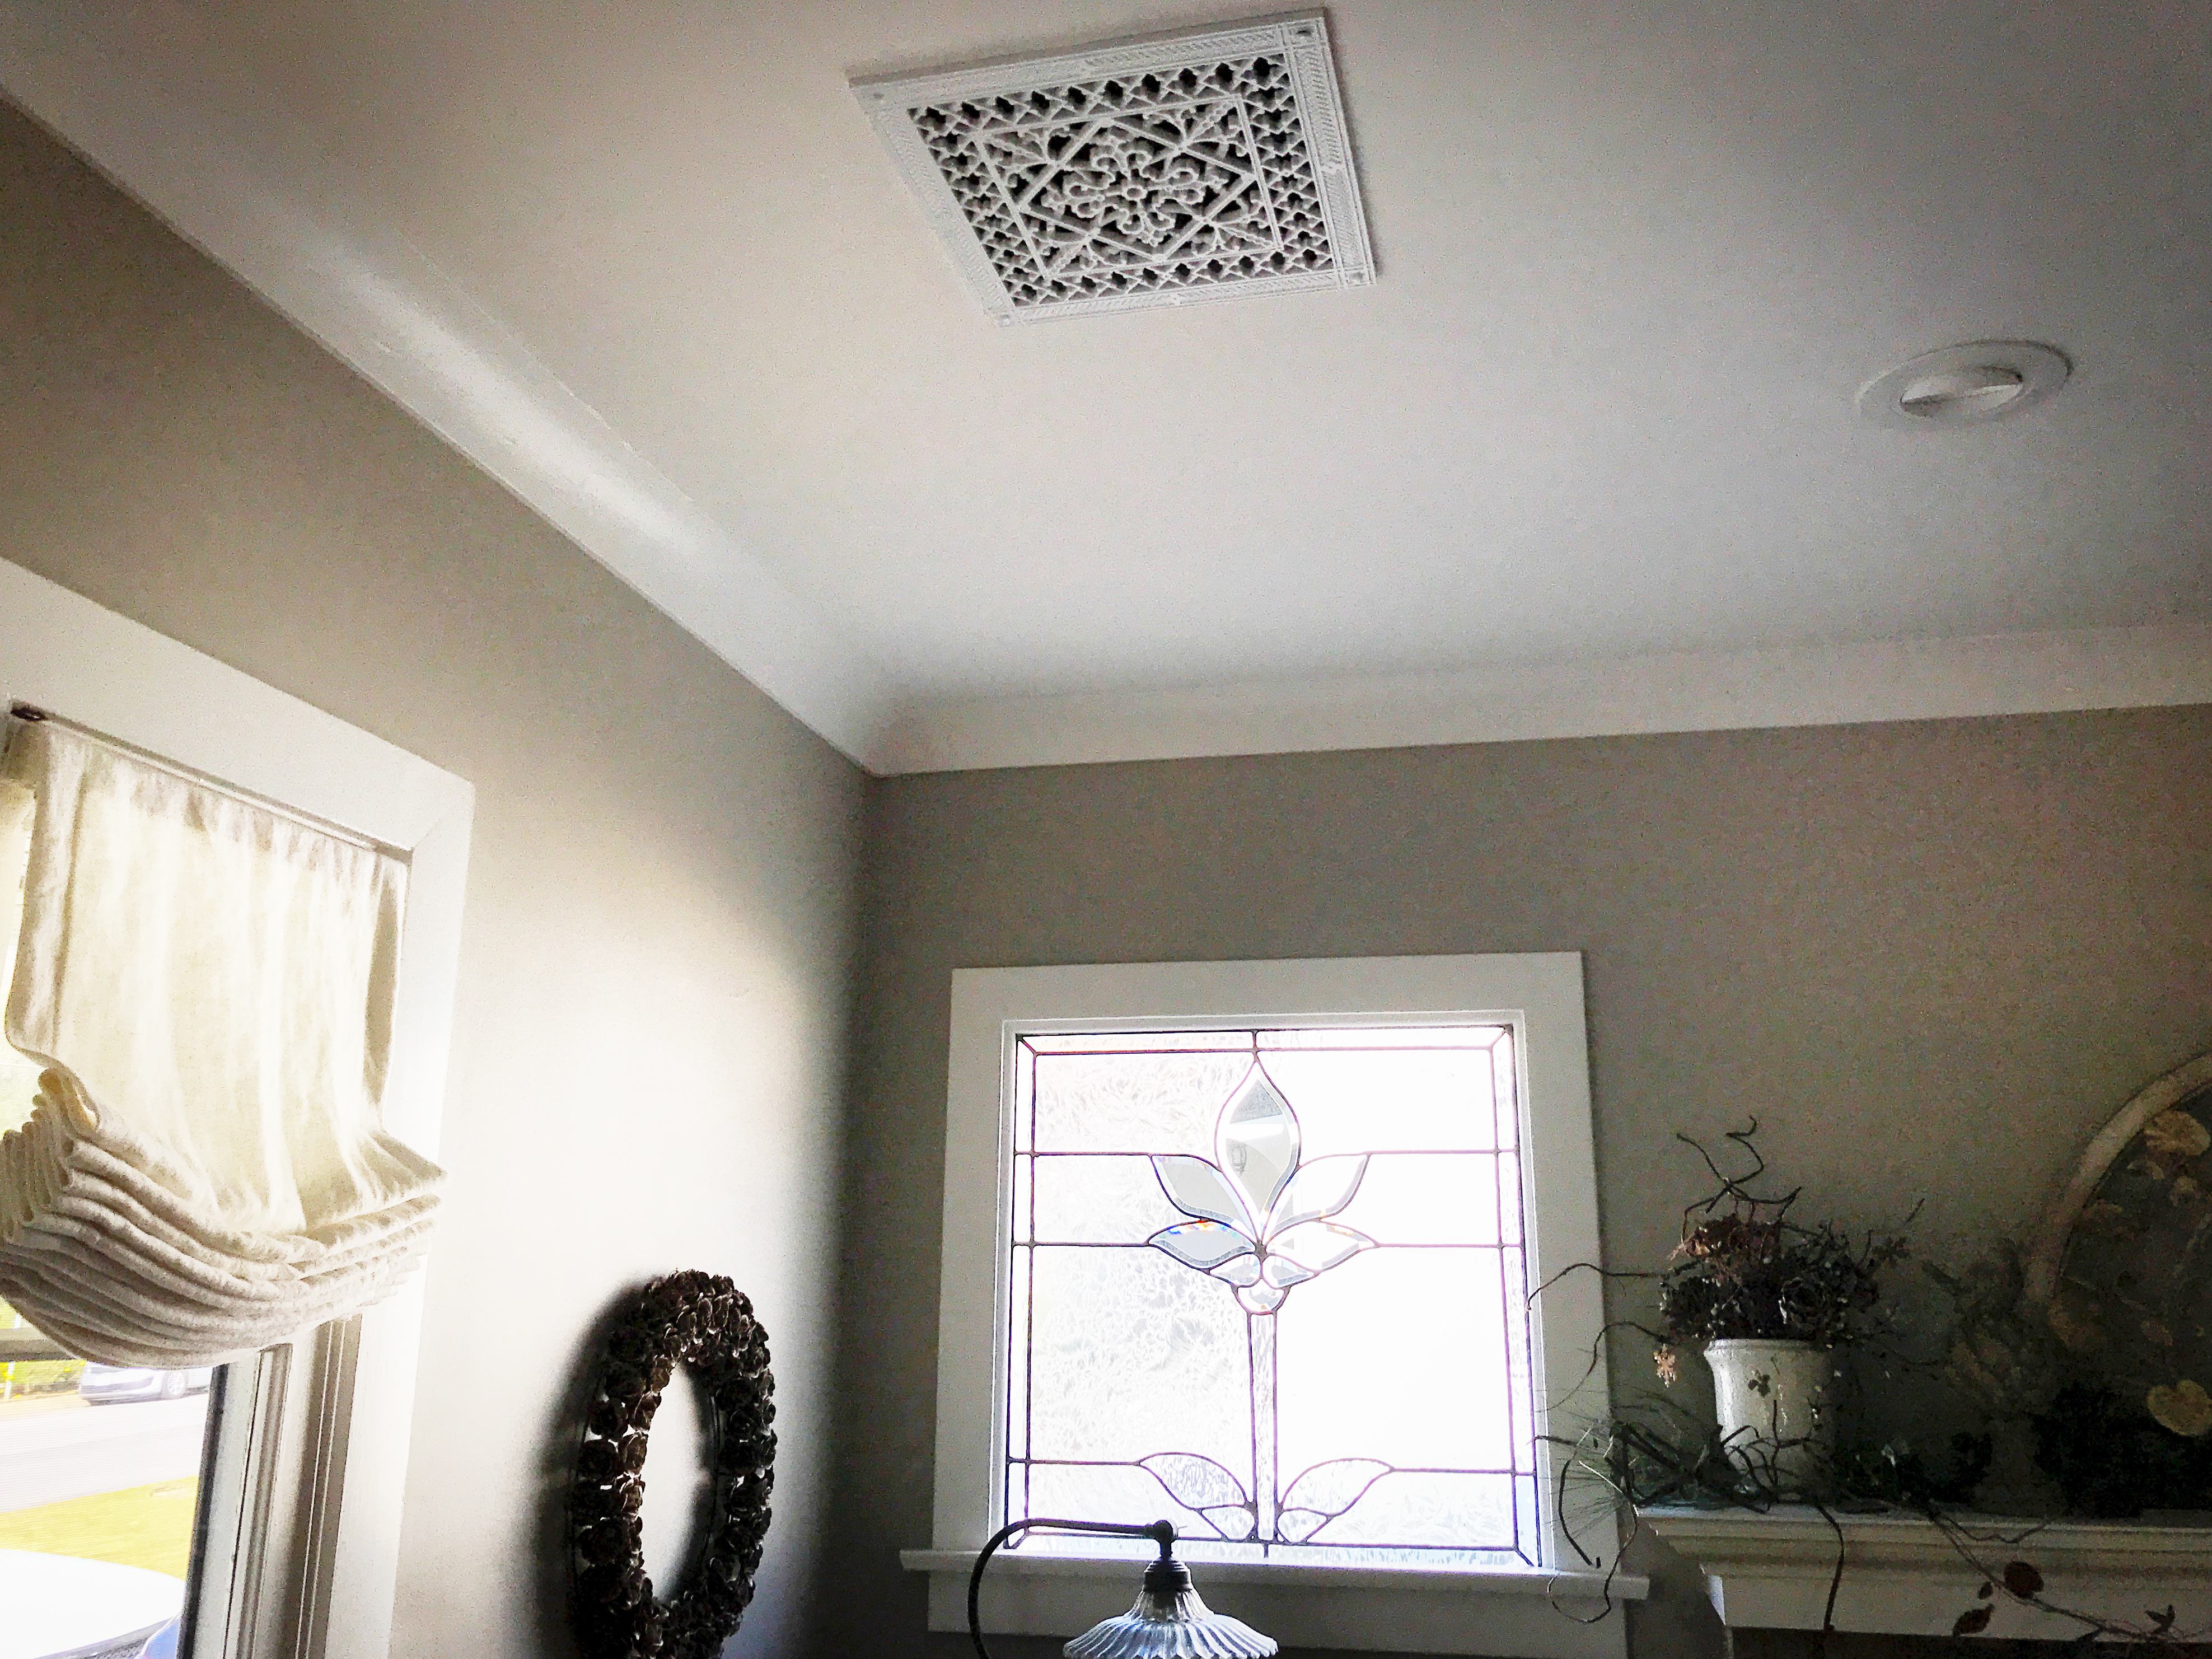 Arts and Crafts style decorative vent cover ceiling installation.